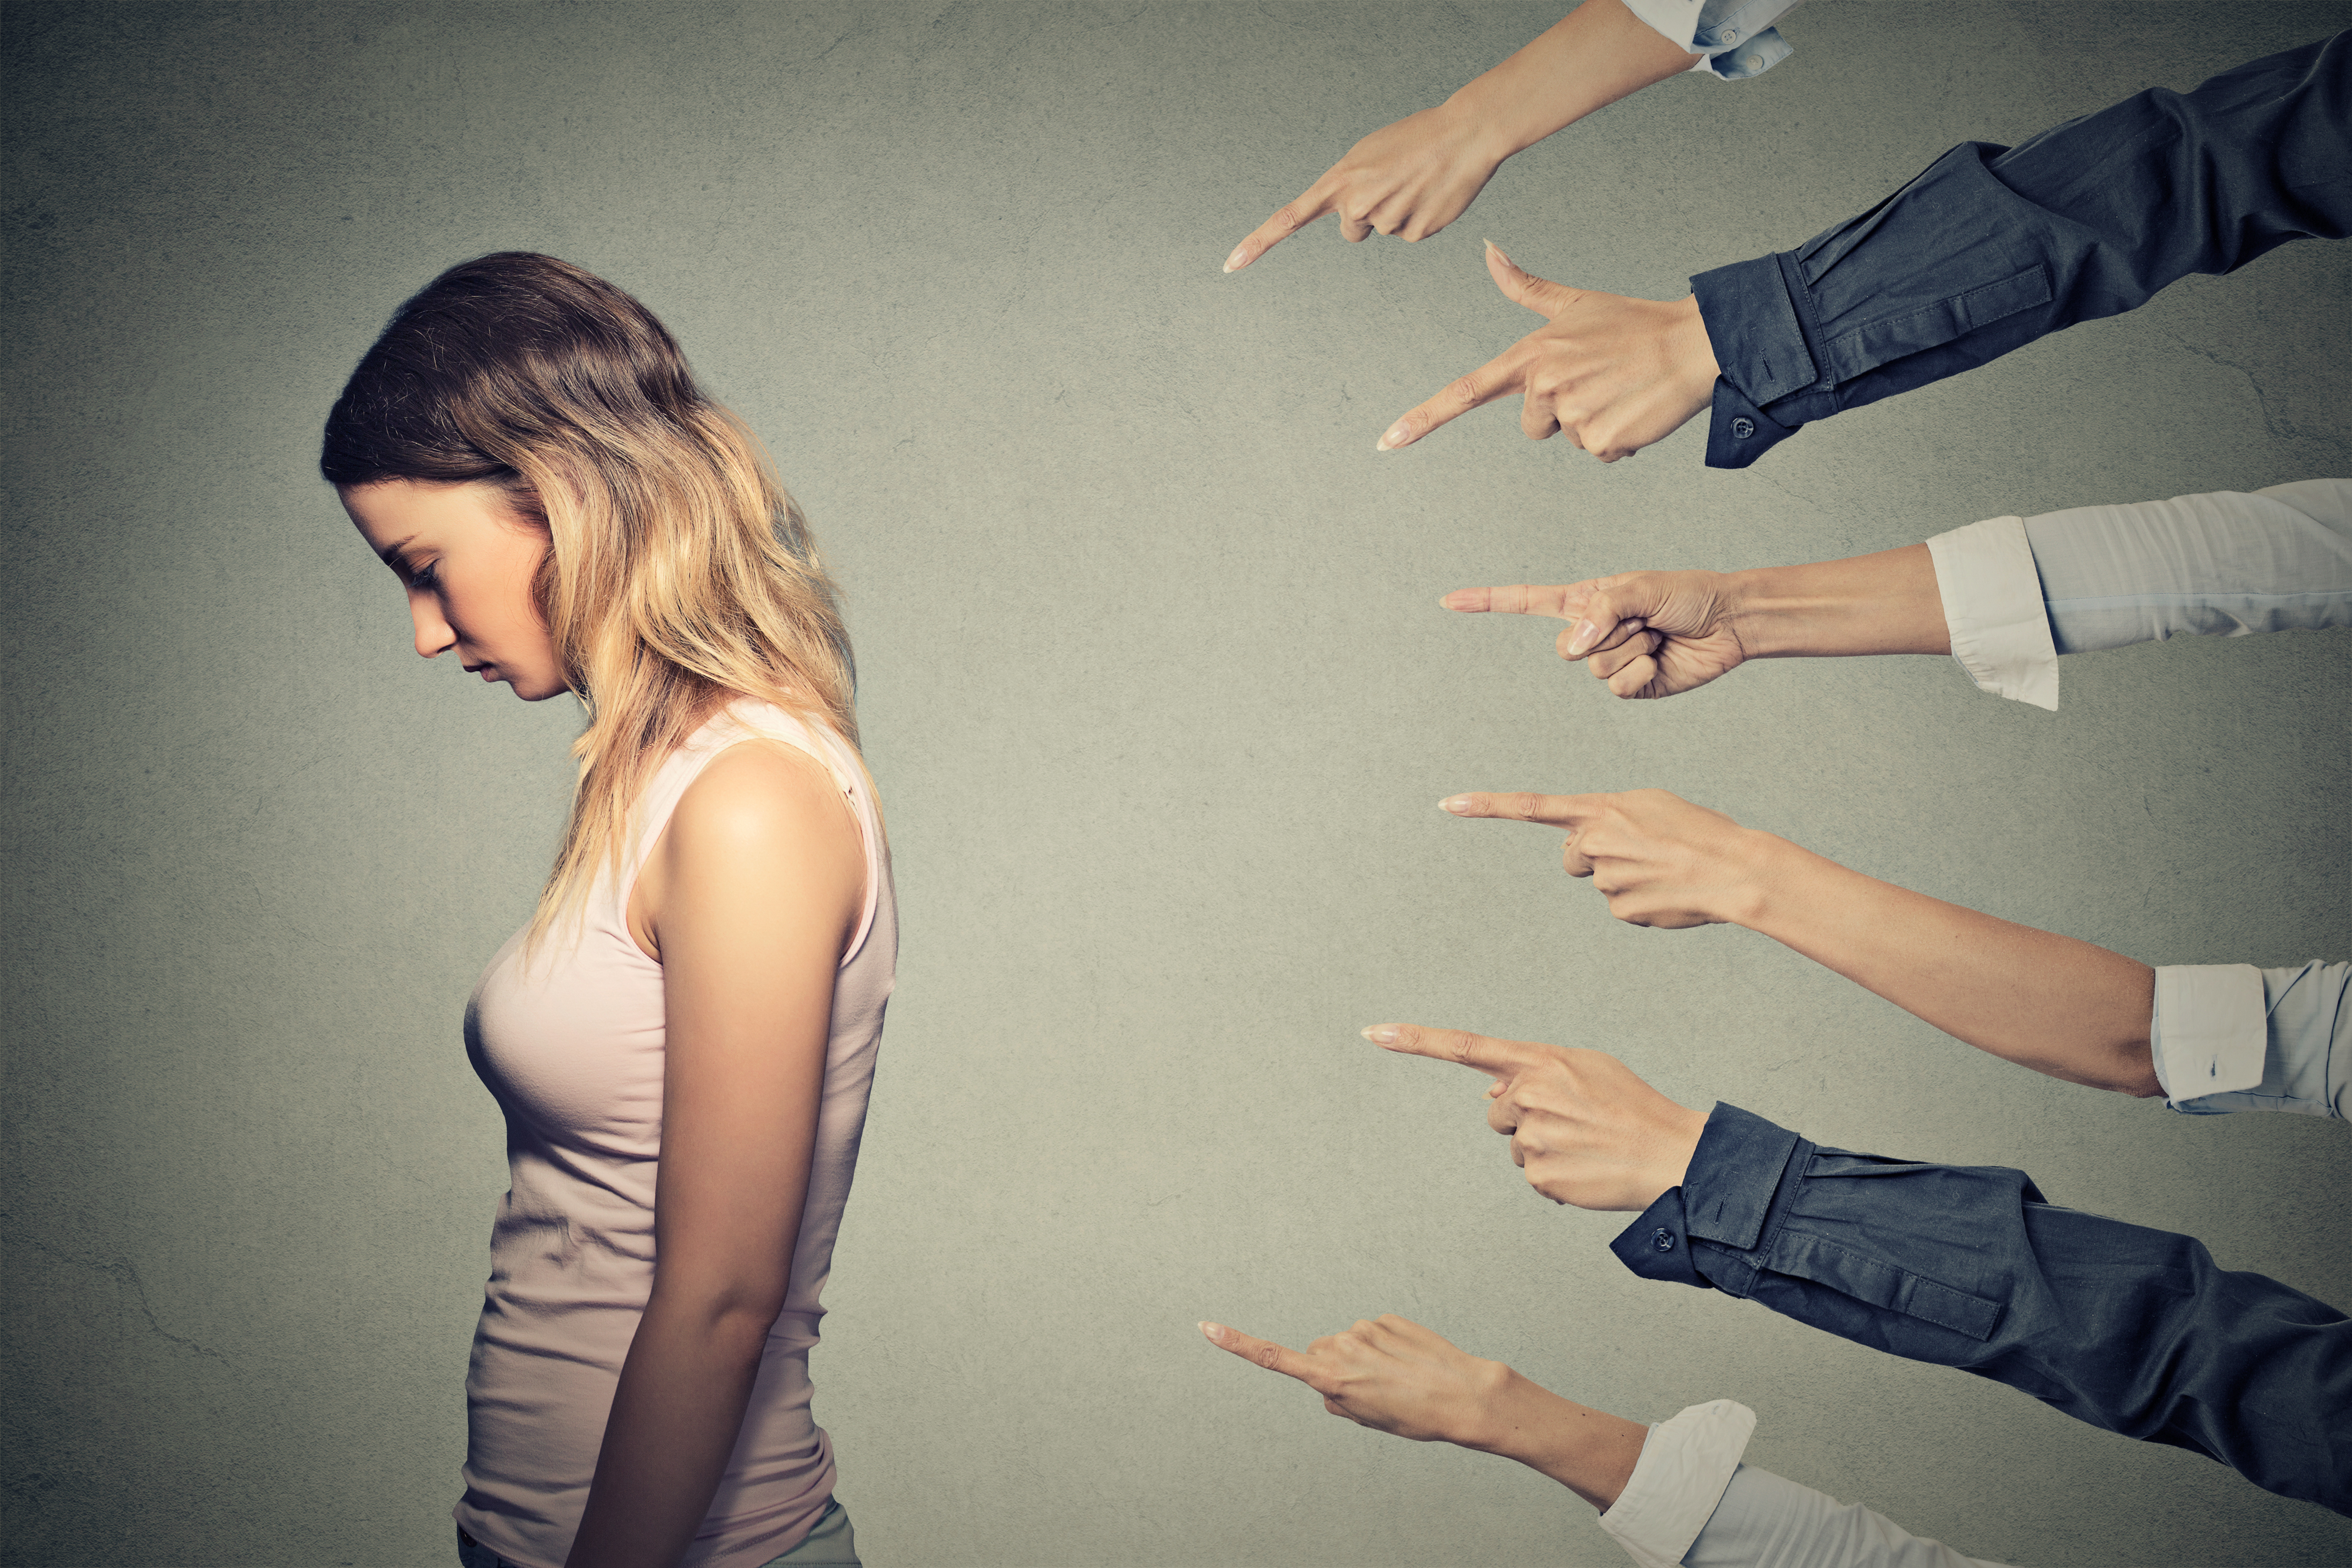 Many hands pointing at a young woman | Source: Shutterstock